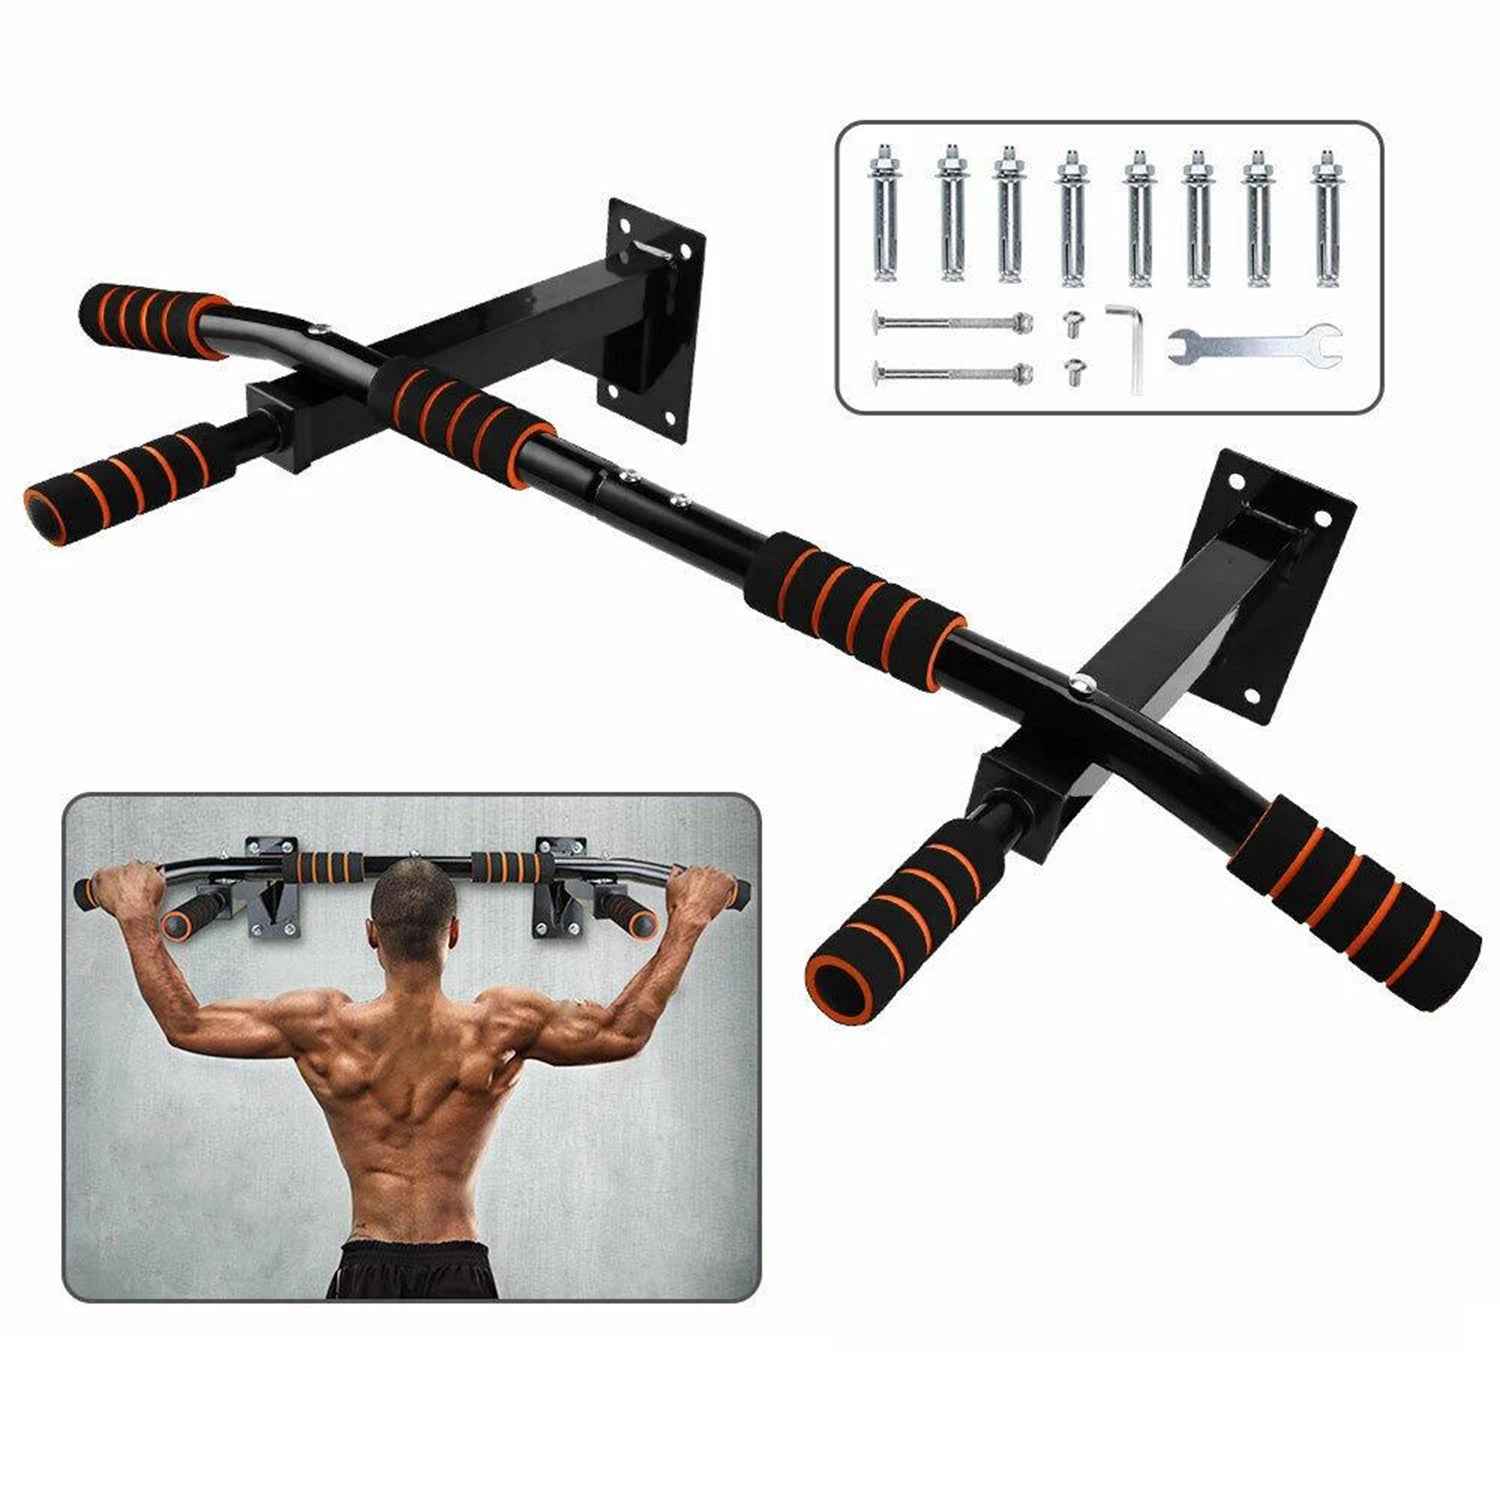 Wall Mounted Chin Pull Up Bar Home Gym Exercise Body Fitness Workout Equipment